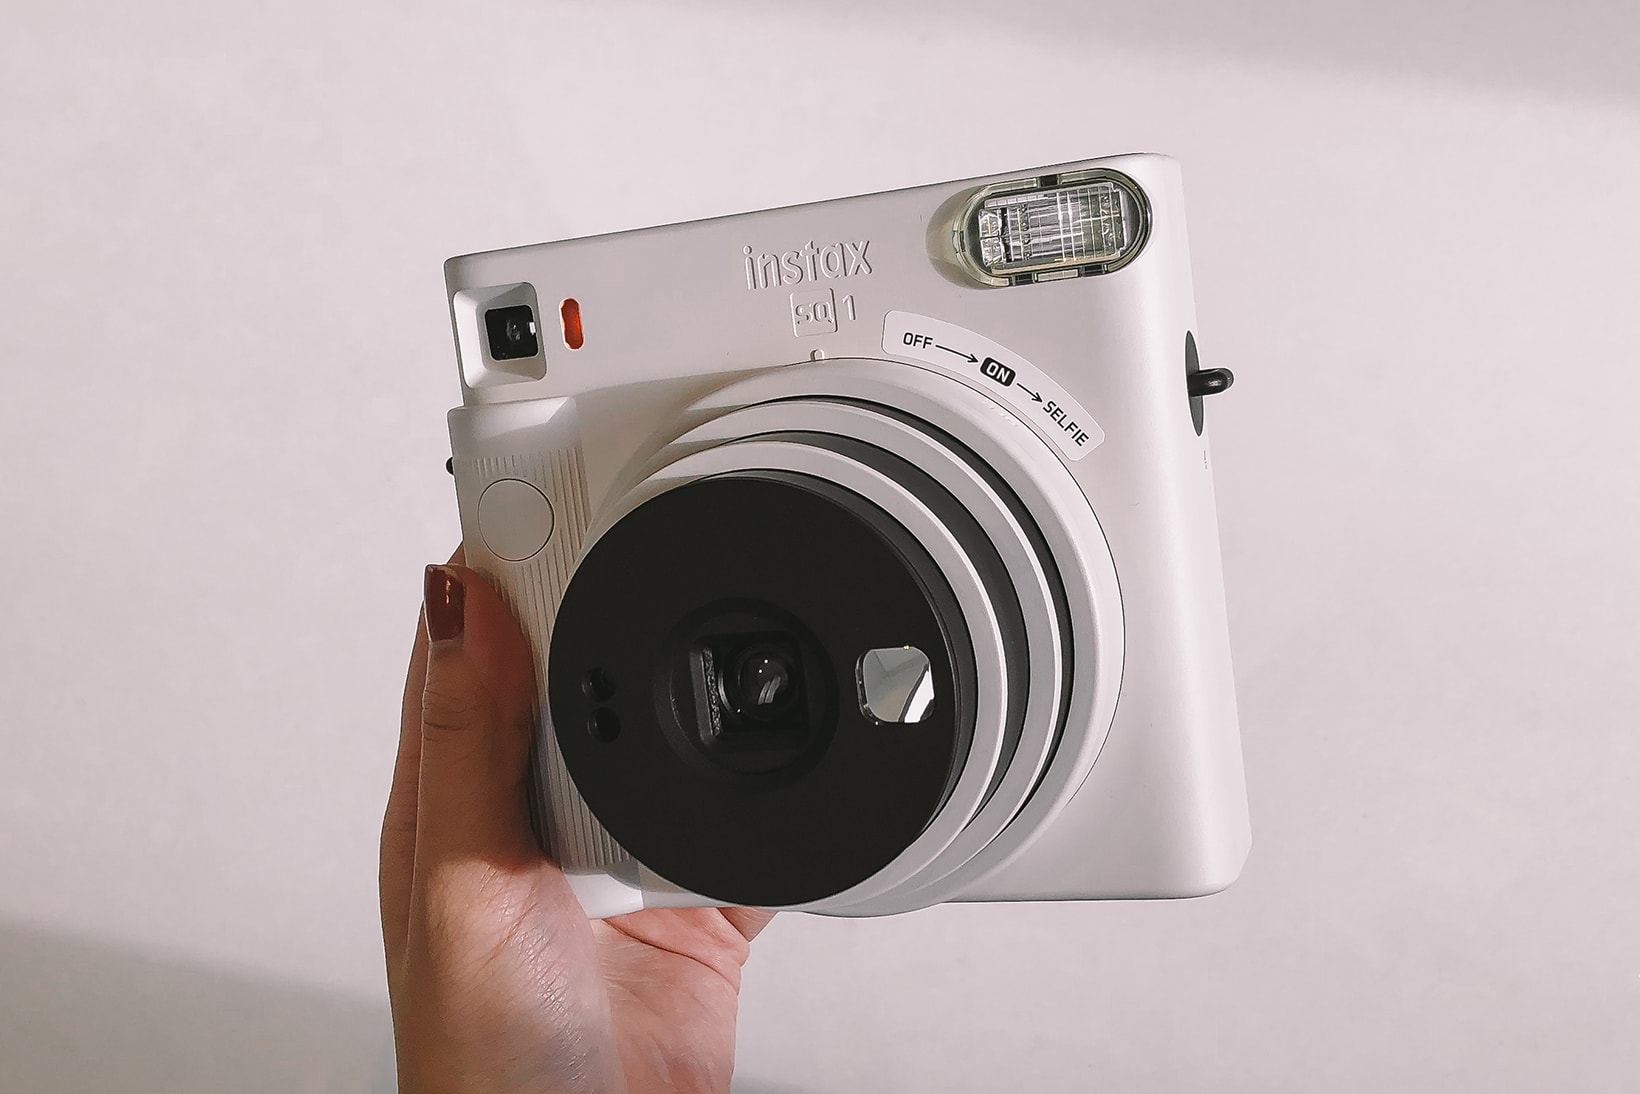 Fujifilm Instax Square SQ1 Review - Should you buy it?